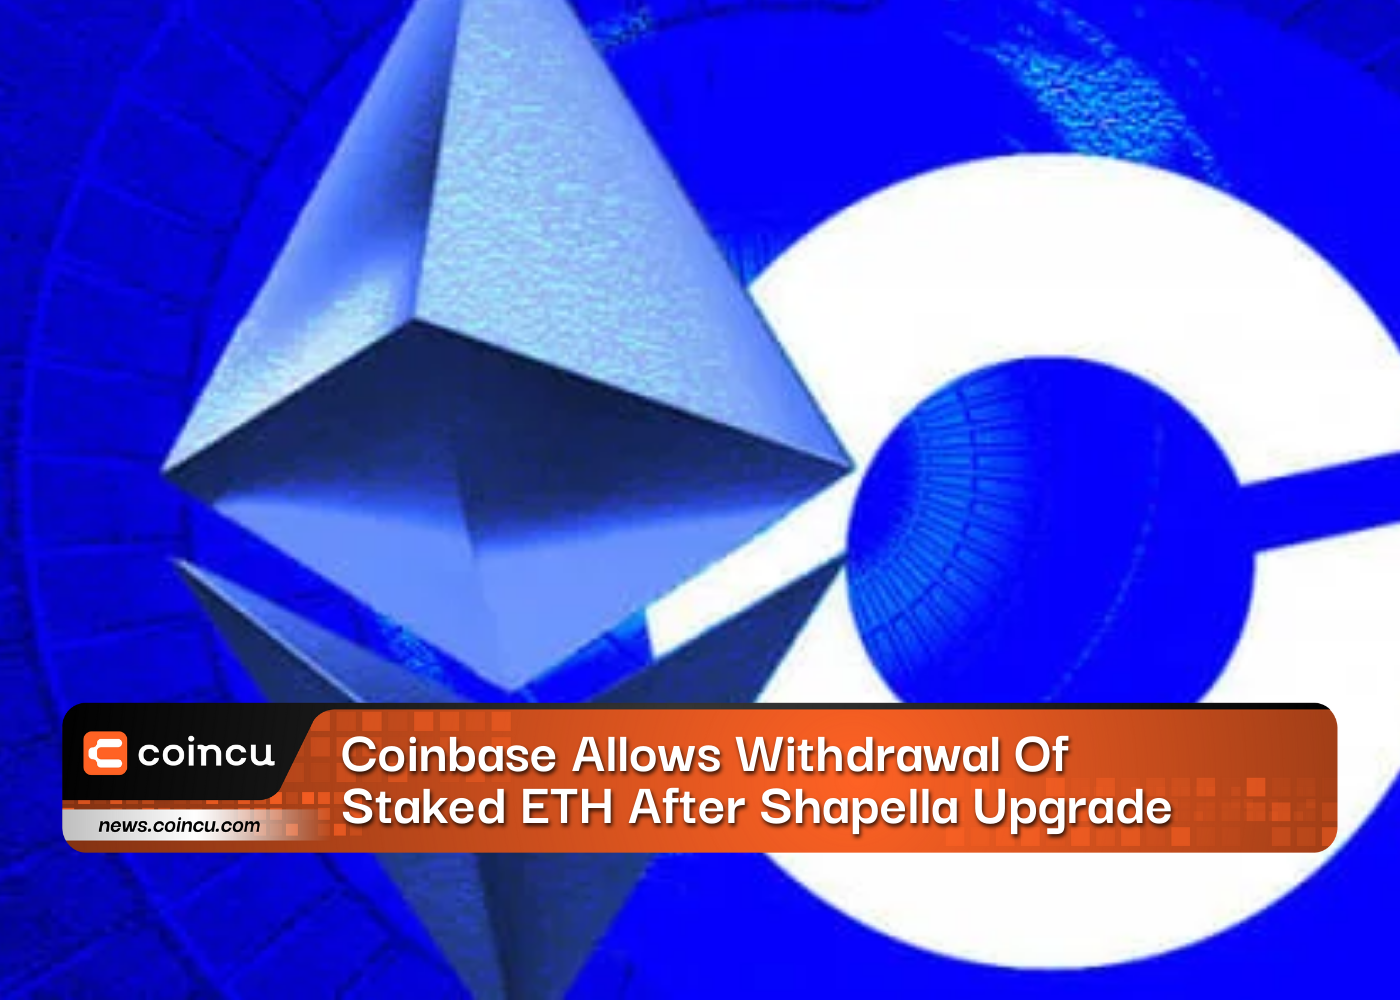 Coinbase Allows Withdrawal Of Staked ETH After Shapella Upgrade